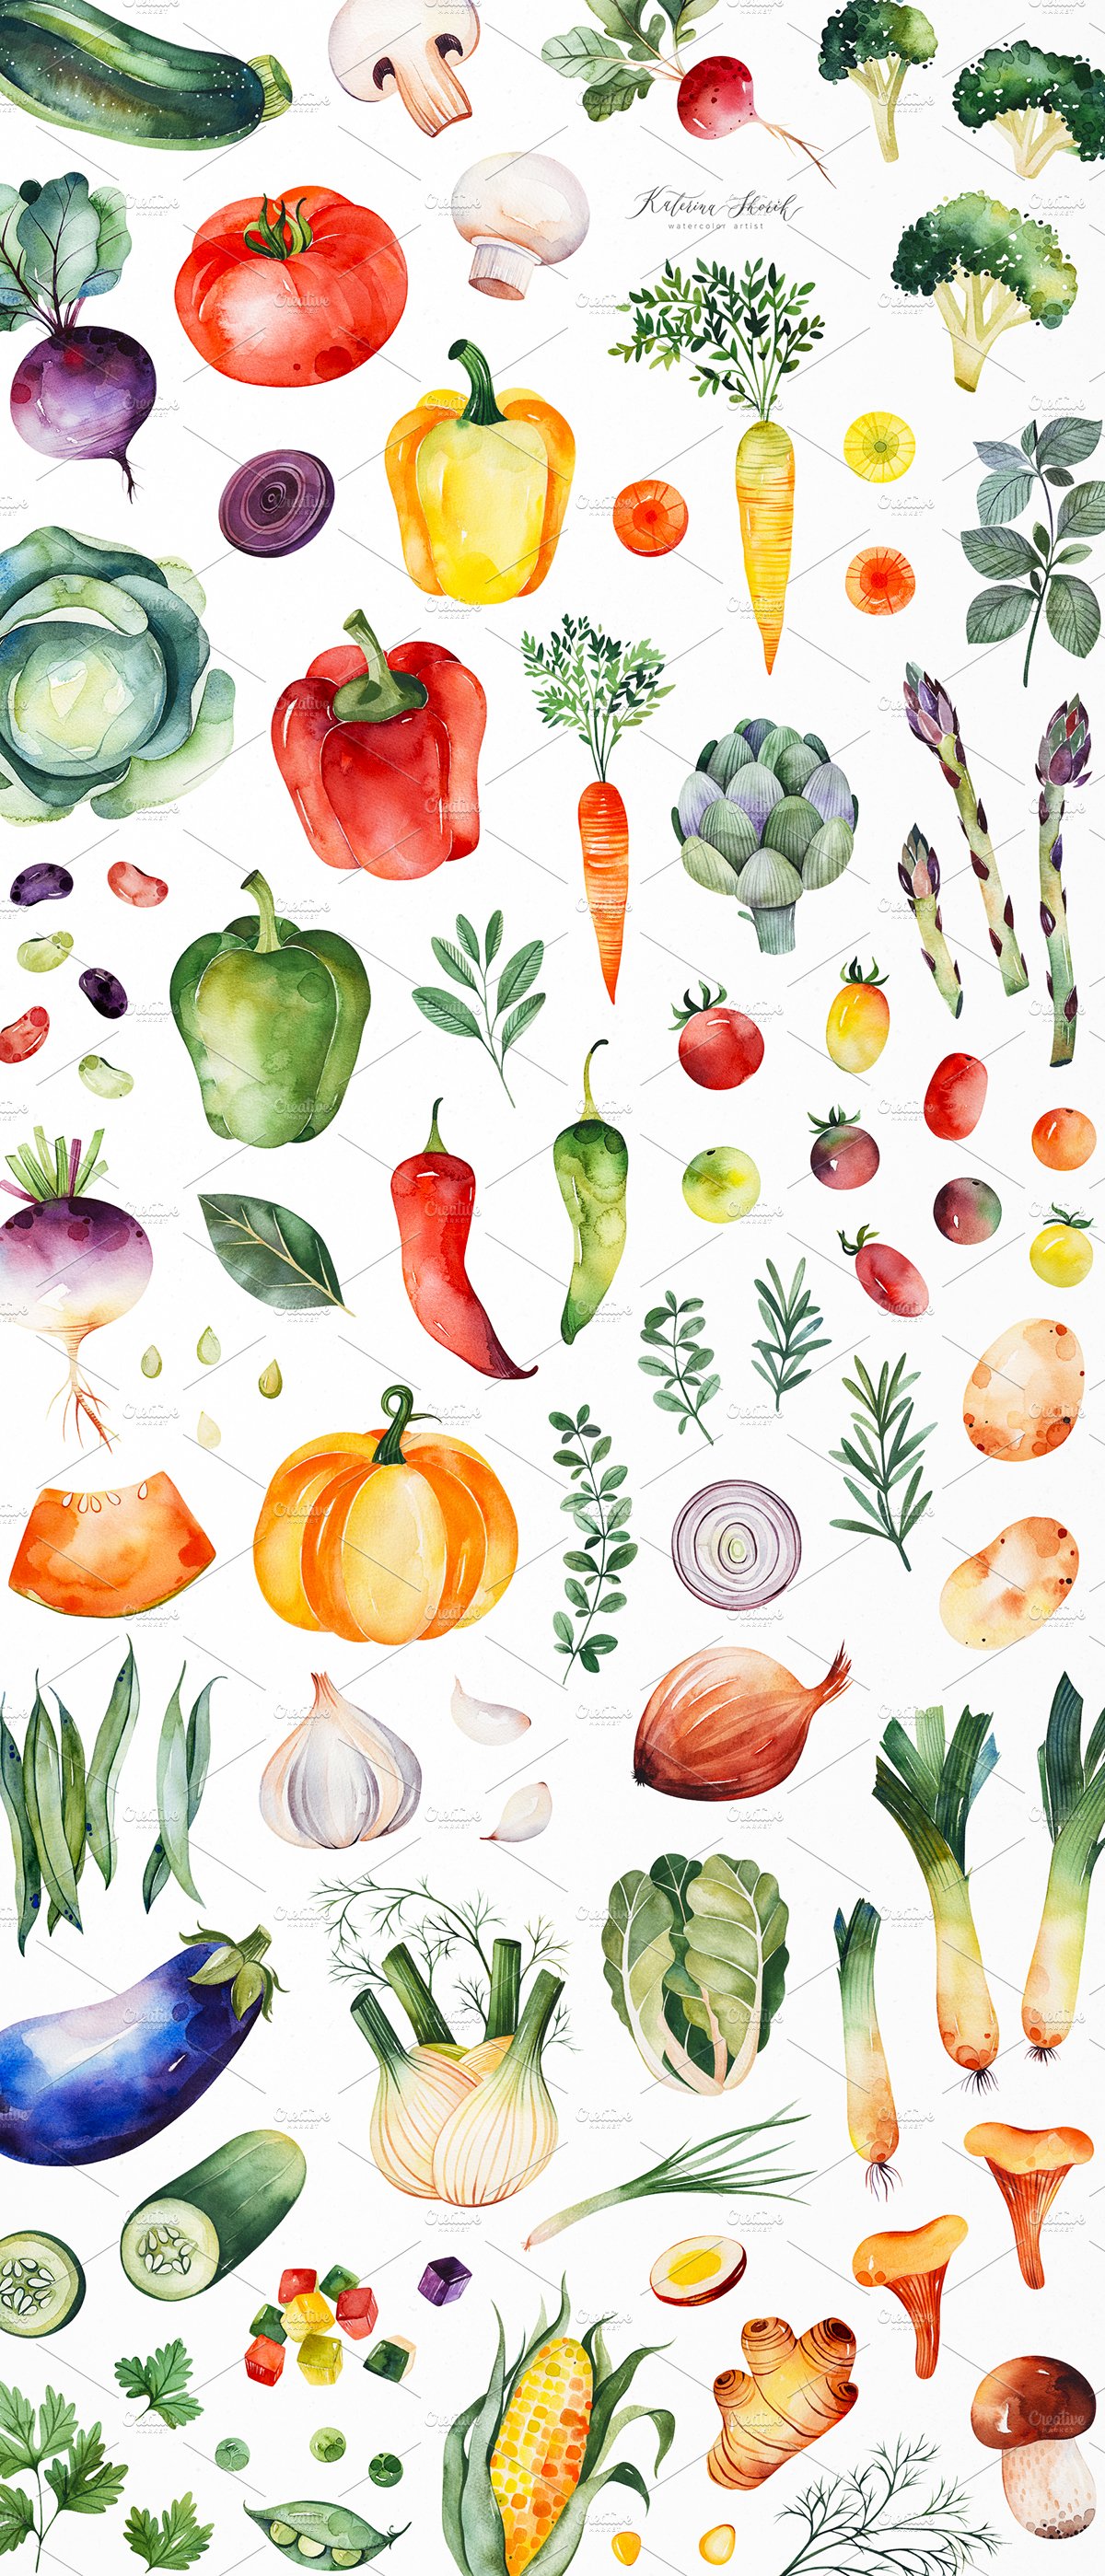 Watercolor Vegetables. preview image.